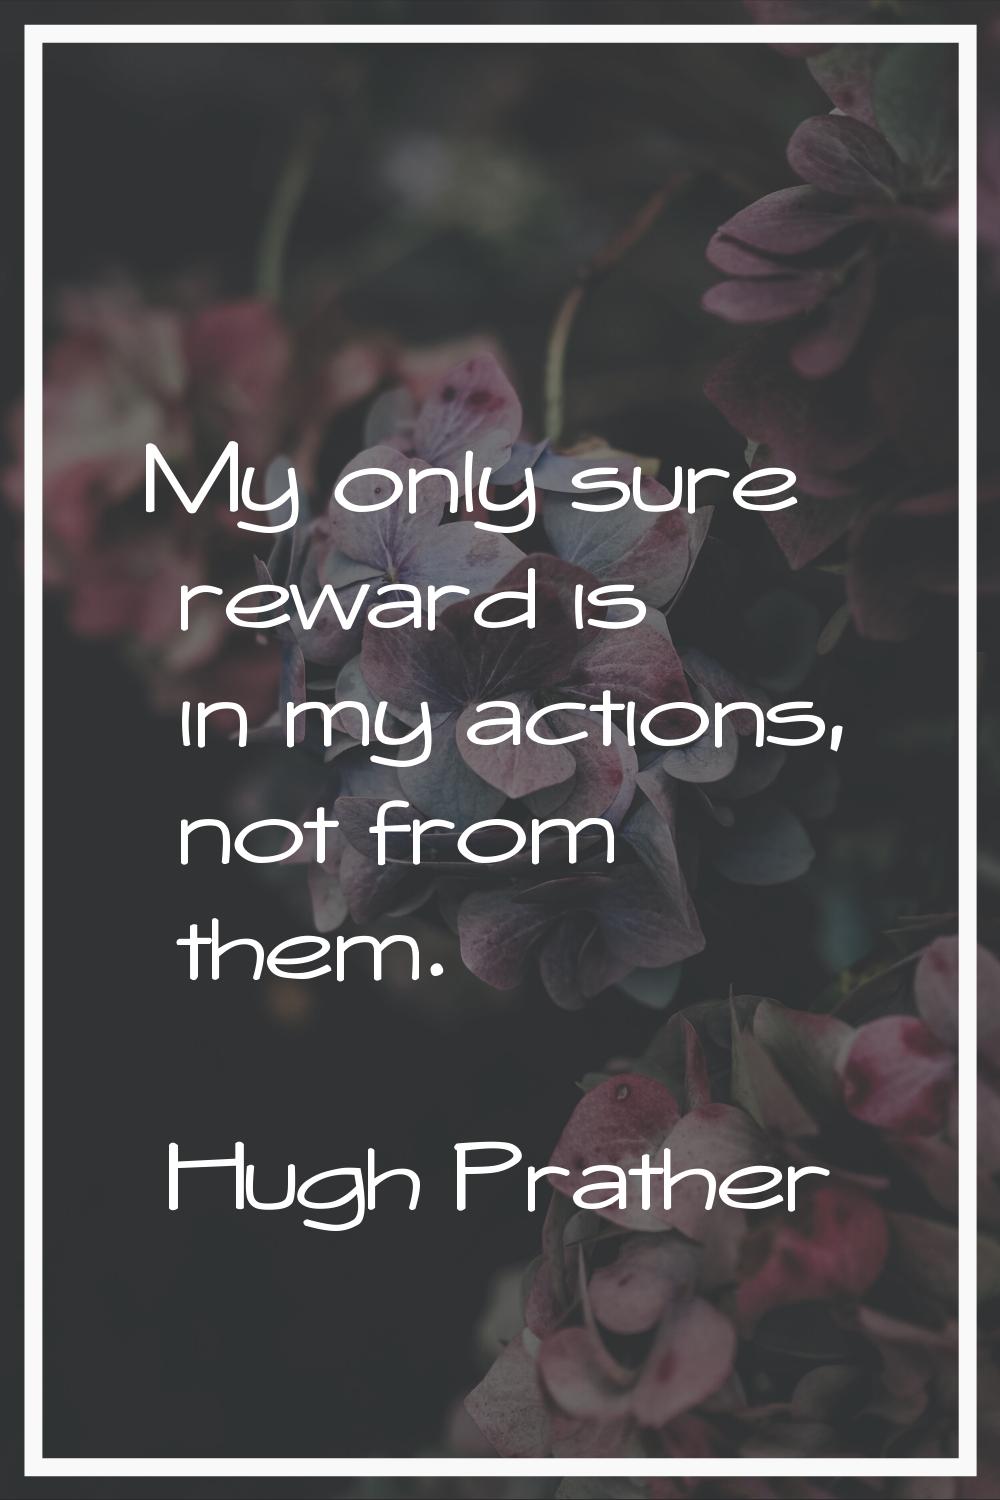 My only sure reward is in my actions, not from them.